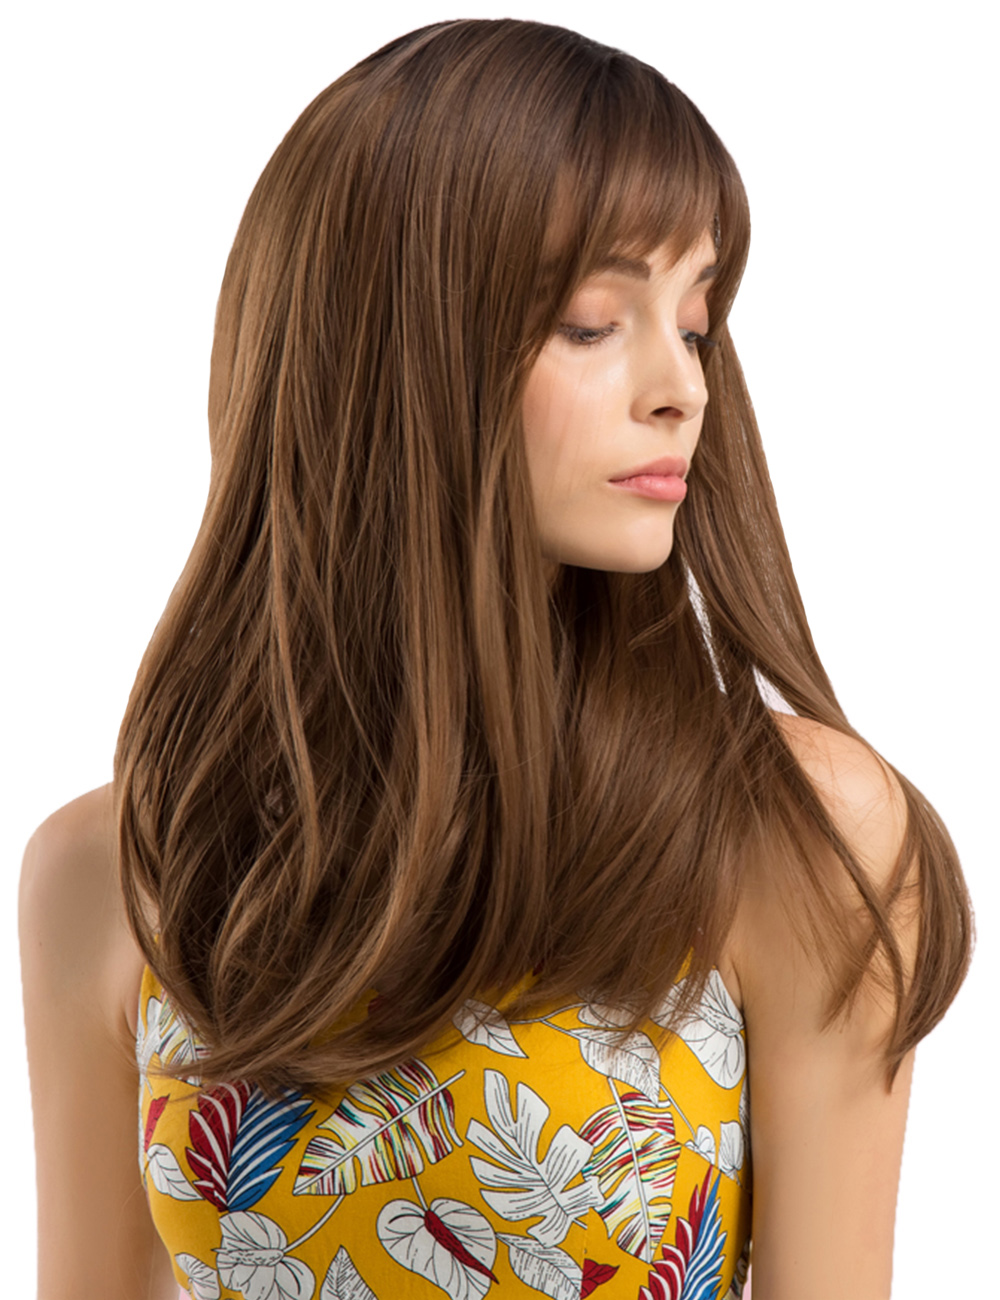 Long Straight Synthetic Hair With Bangs Women Wigs 20 Inches